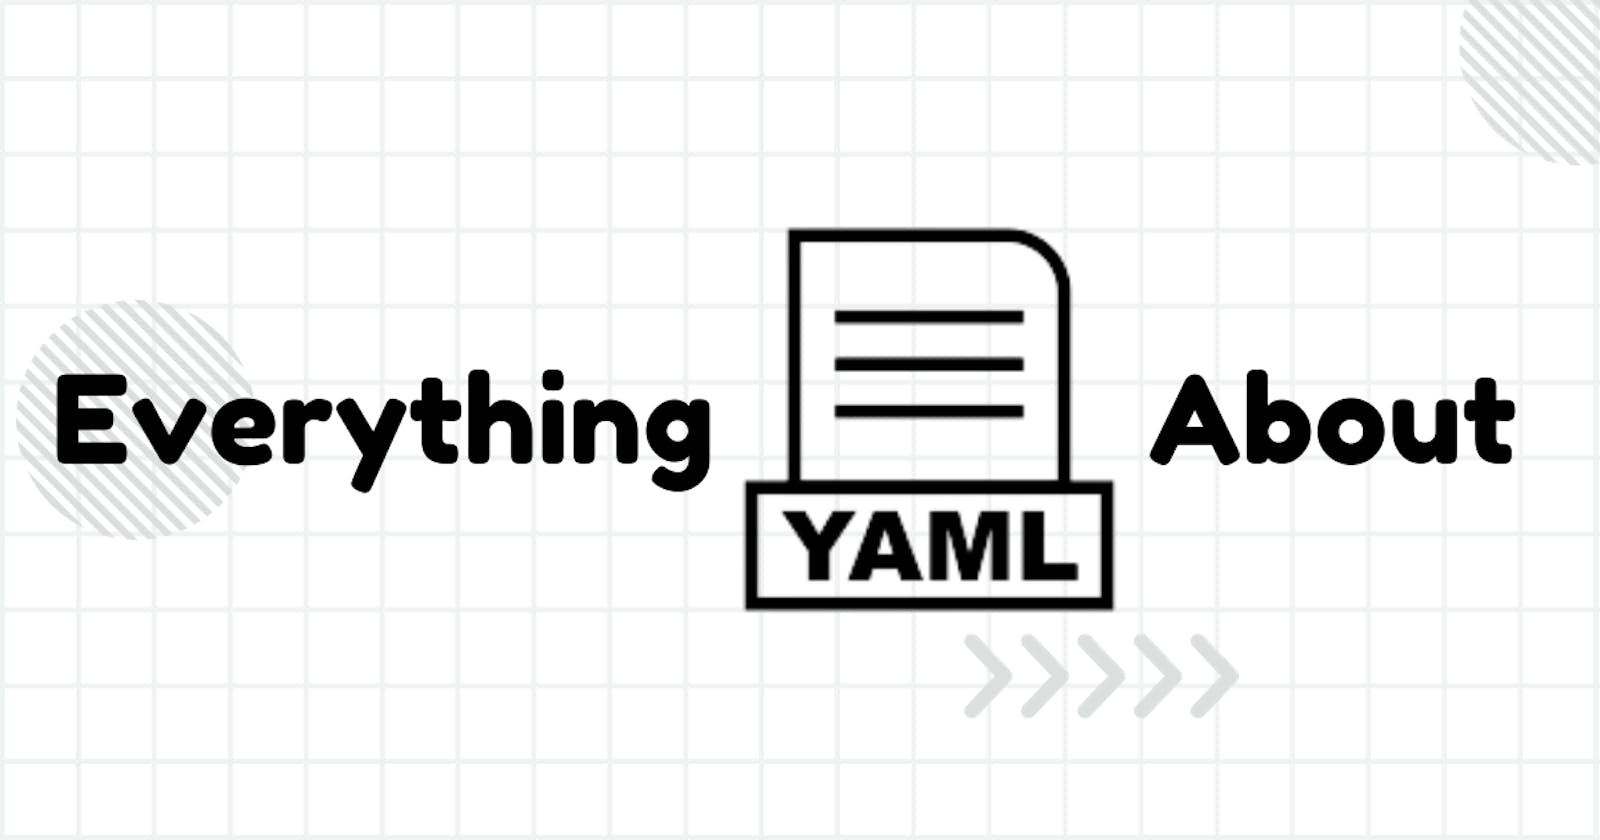 YAML Complete: All Data types, Examples, and Comparisons